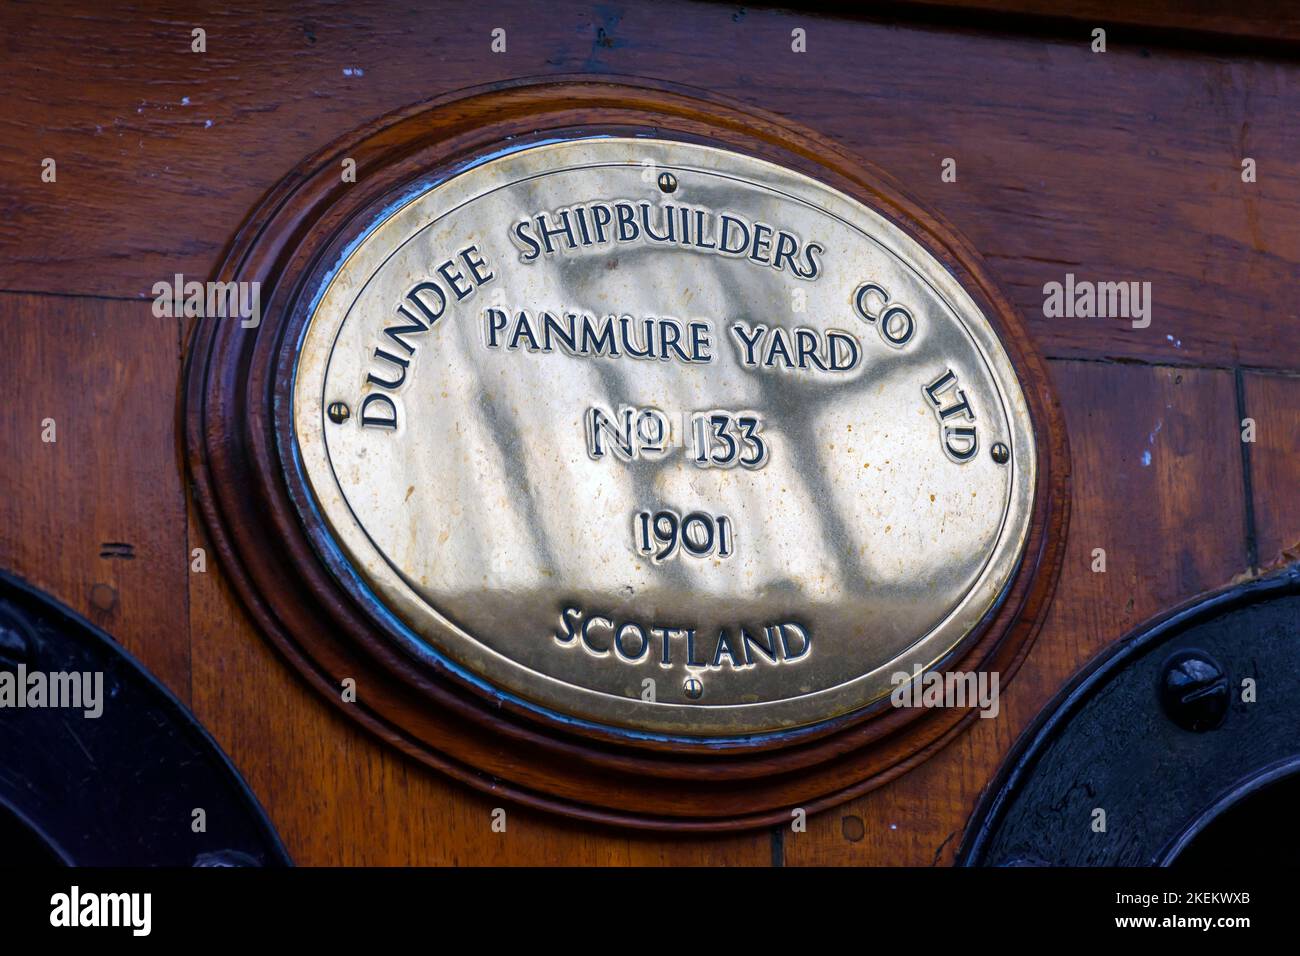 Ship builder's plate on board the RRS Discovery, Discovery Point, Dundee, Scotland, UK Stock Photo